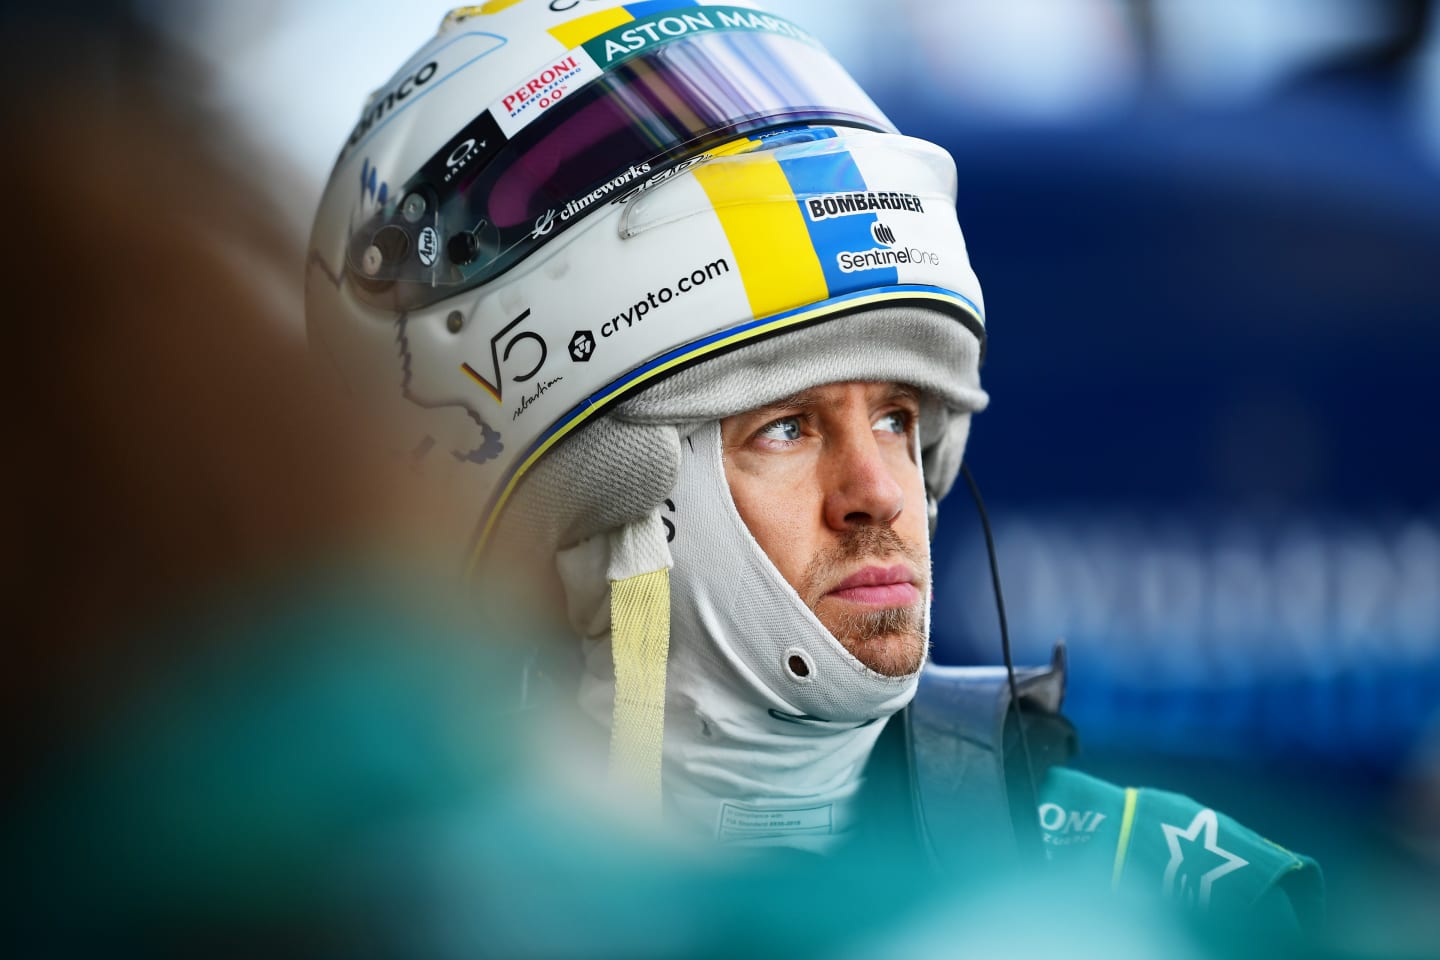 MELBOURNE, AUSTRALIA - APRIL 09: Sebastian Vettel of Germany and Aston Martin F1 Team looks on in the garage during qualifying ahead of the F1 Grand Prix of Australia at Melbourne Grand Prix Circuit on April 09, 2022 in Melbourne, Australia. (Photo by Mario Renzi - Formula 1/Formula 1 via Getty Images)